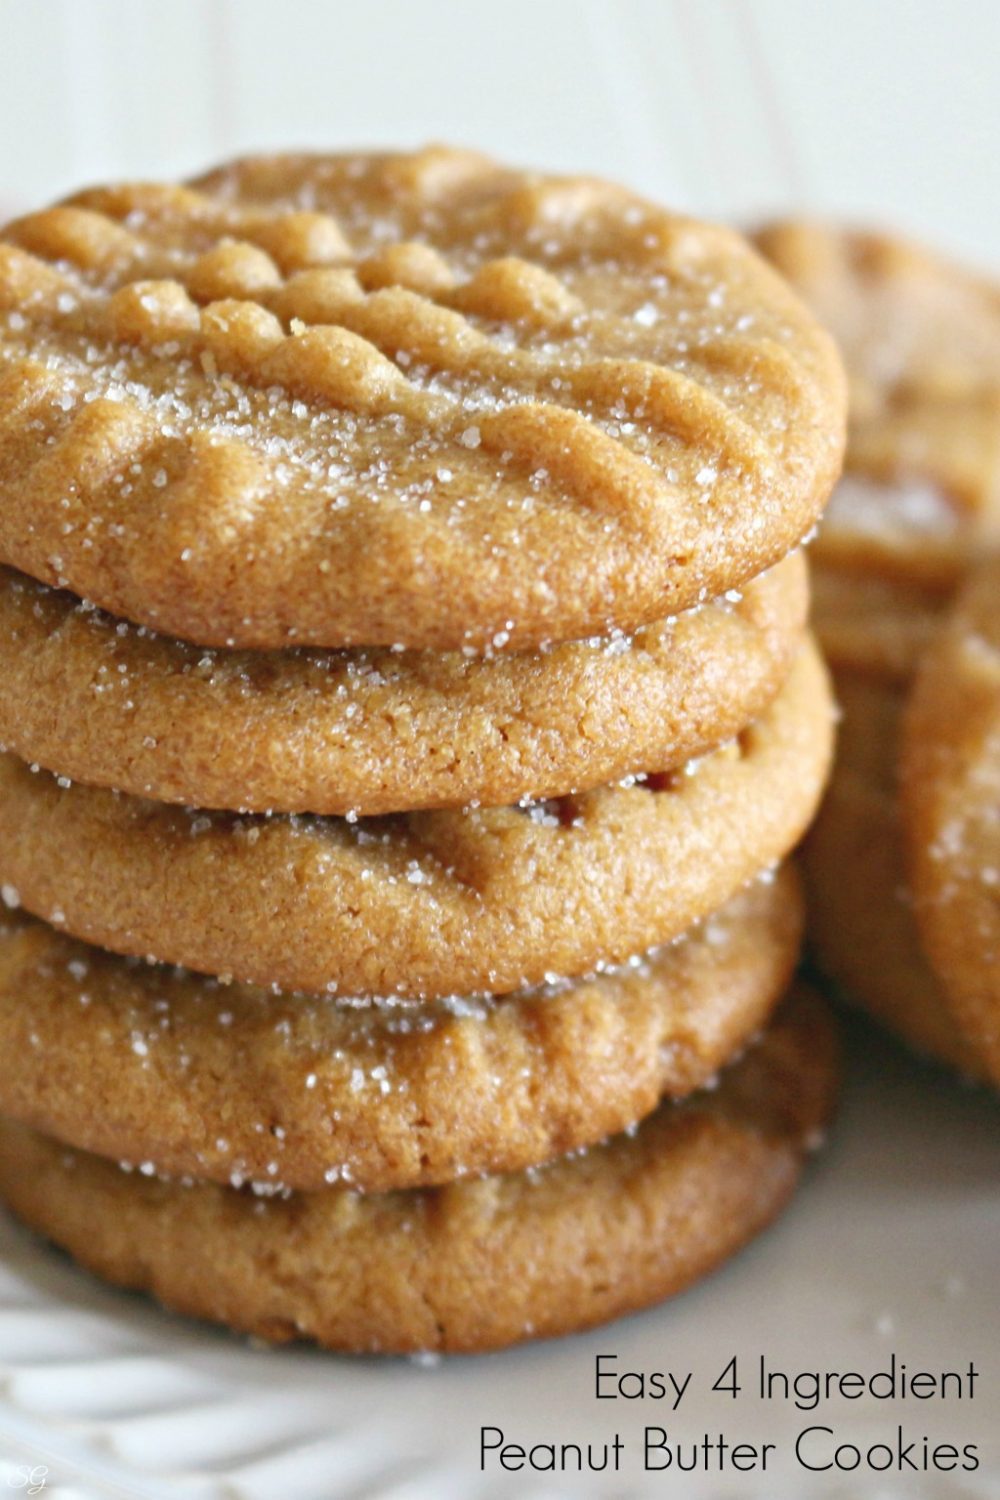 Peanut Butter Cookies Allrecipes
 The Easiest Peanut Butter Cookie Recipe EVER